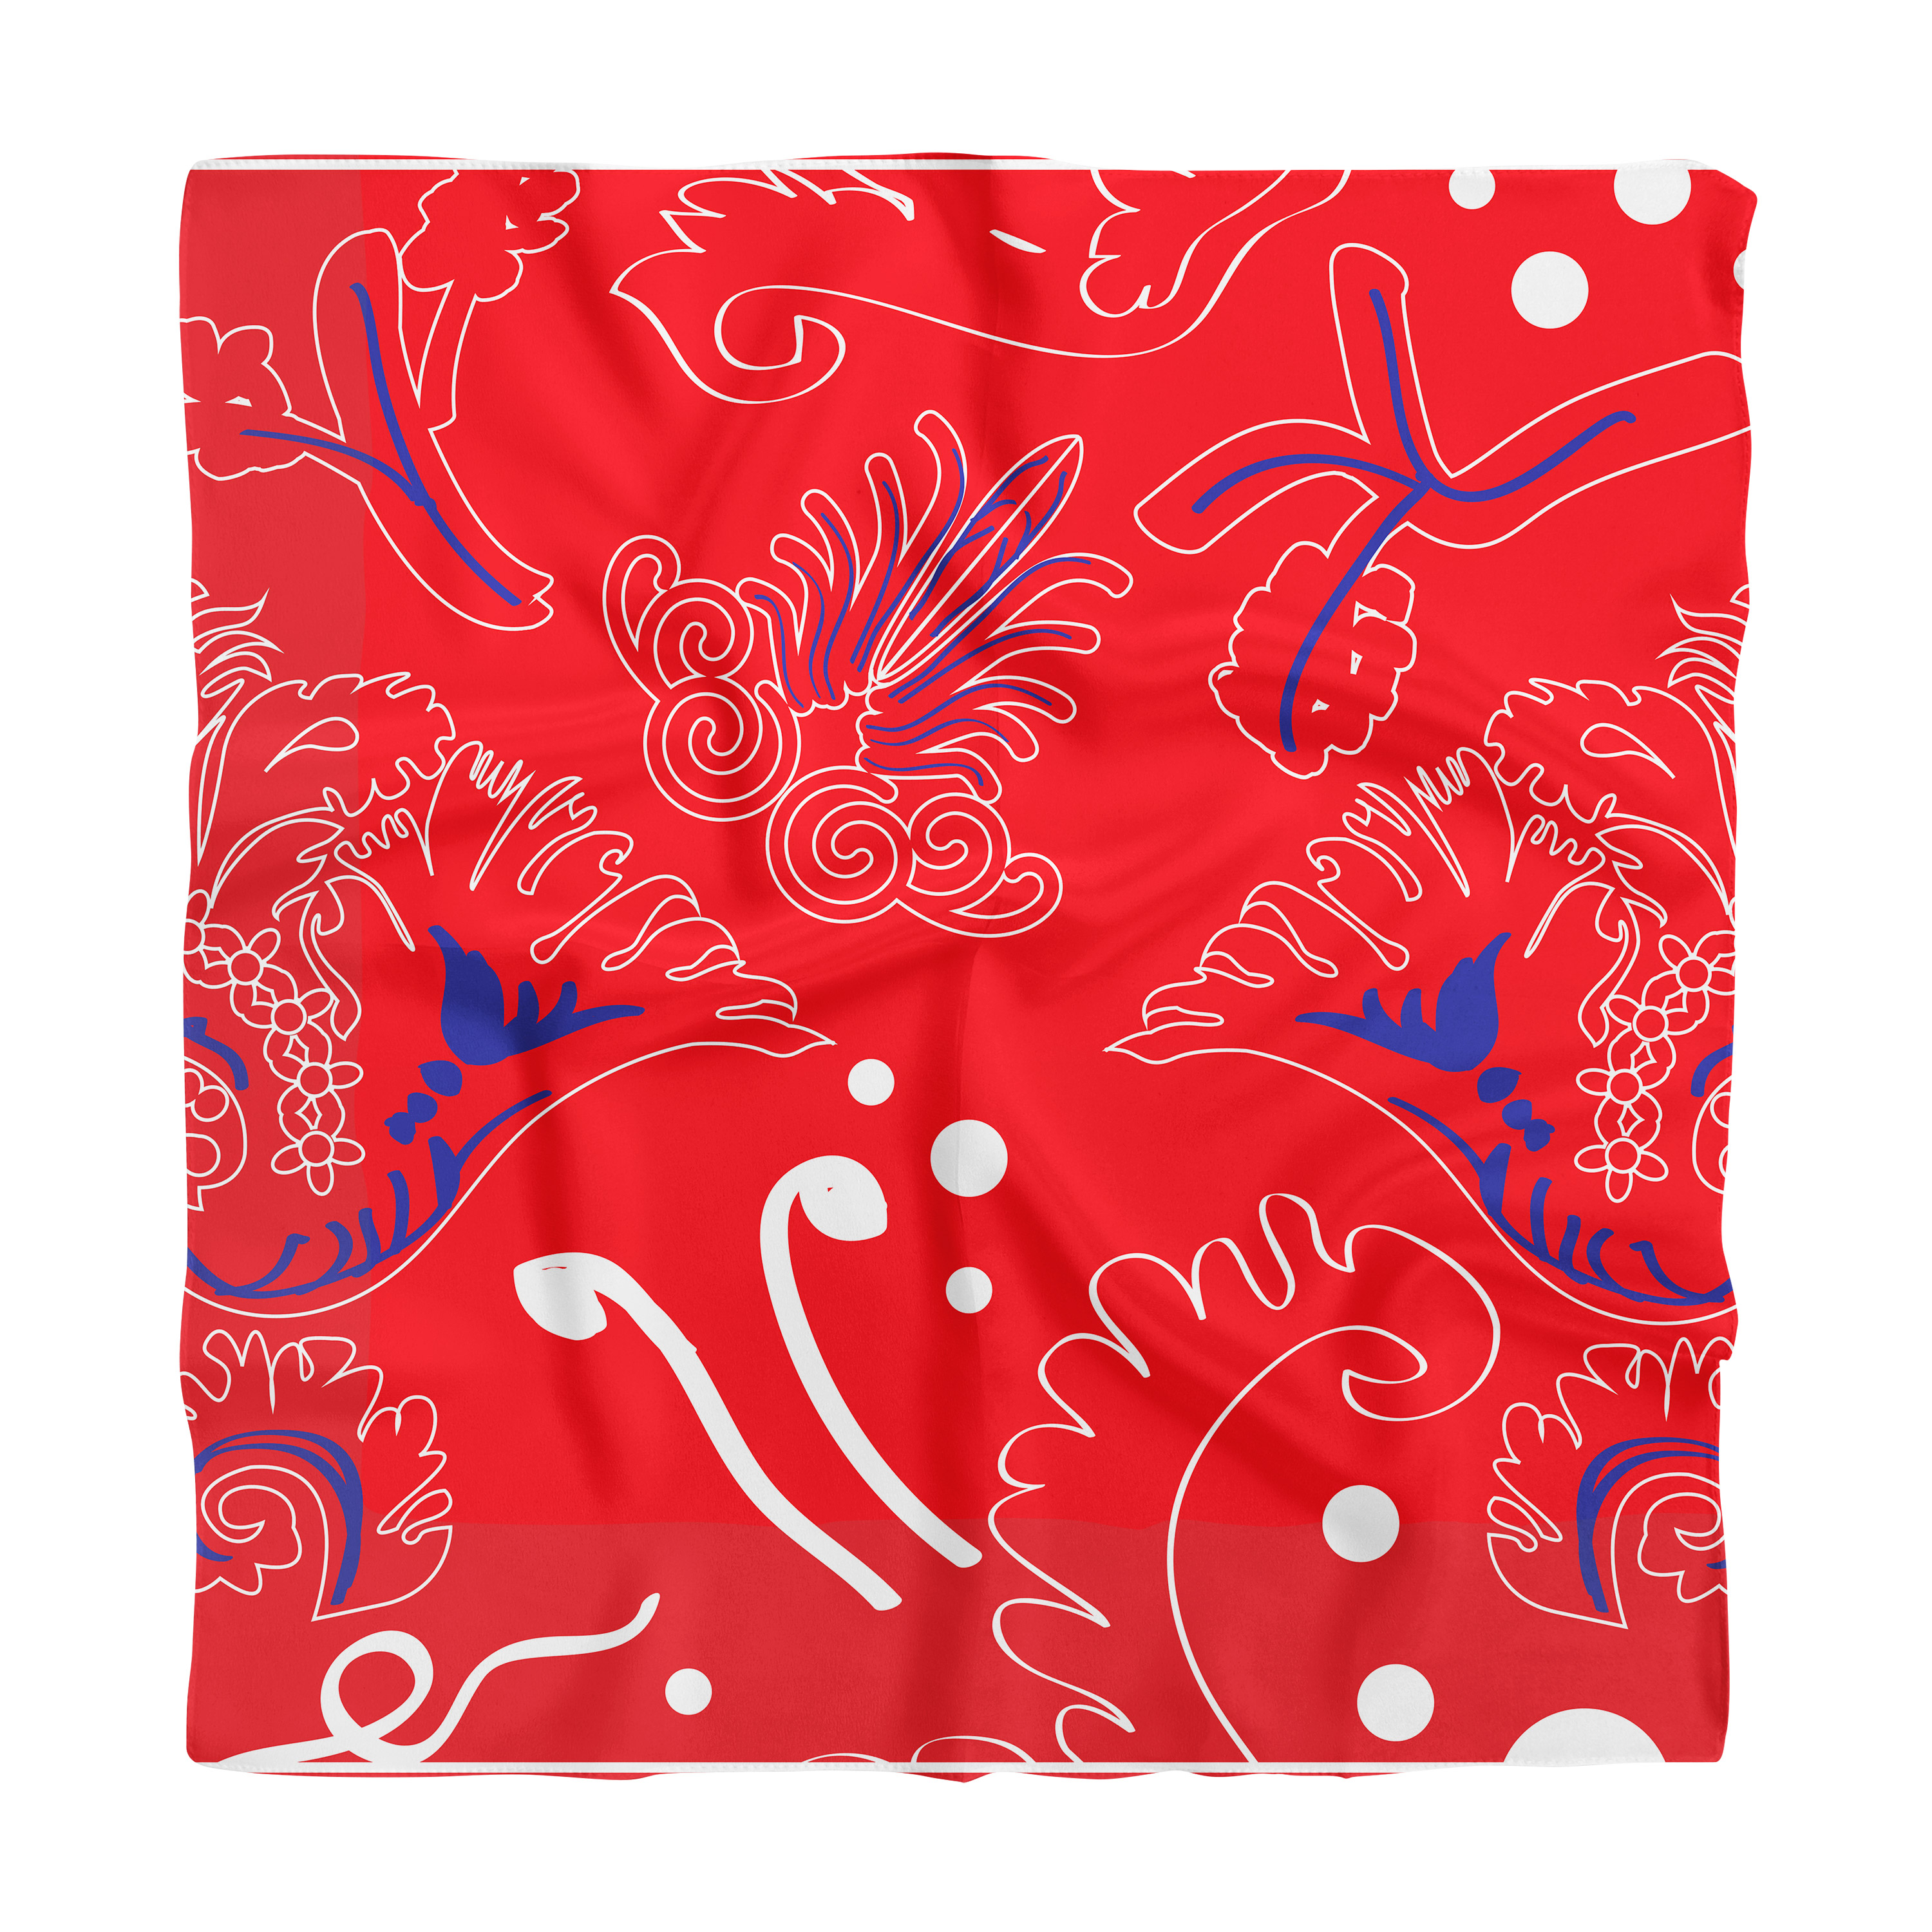 Silk scarves can be customized.